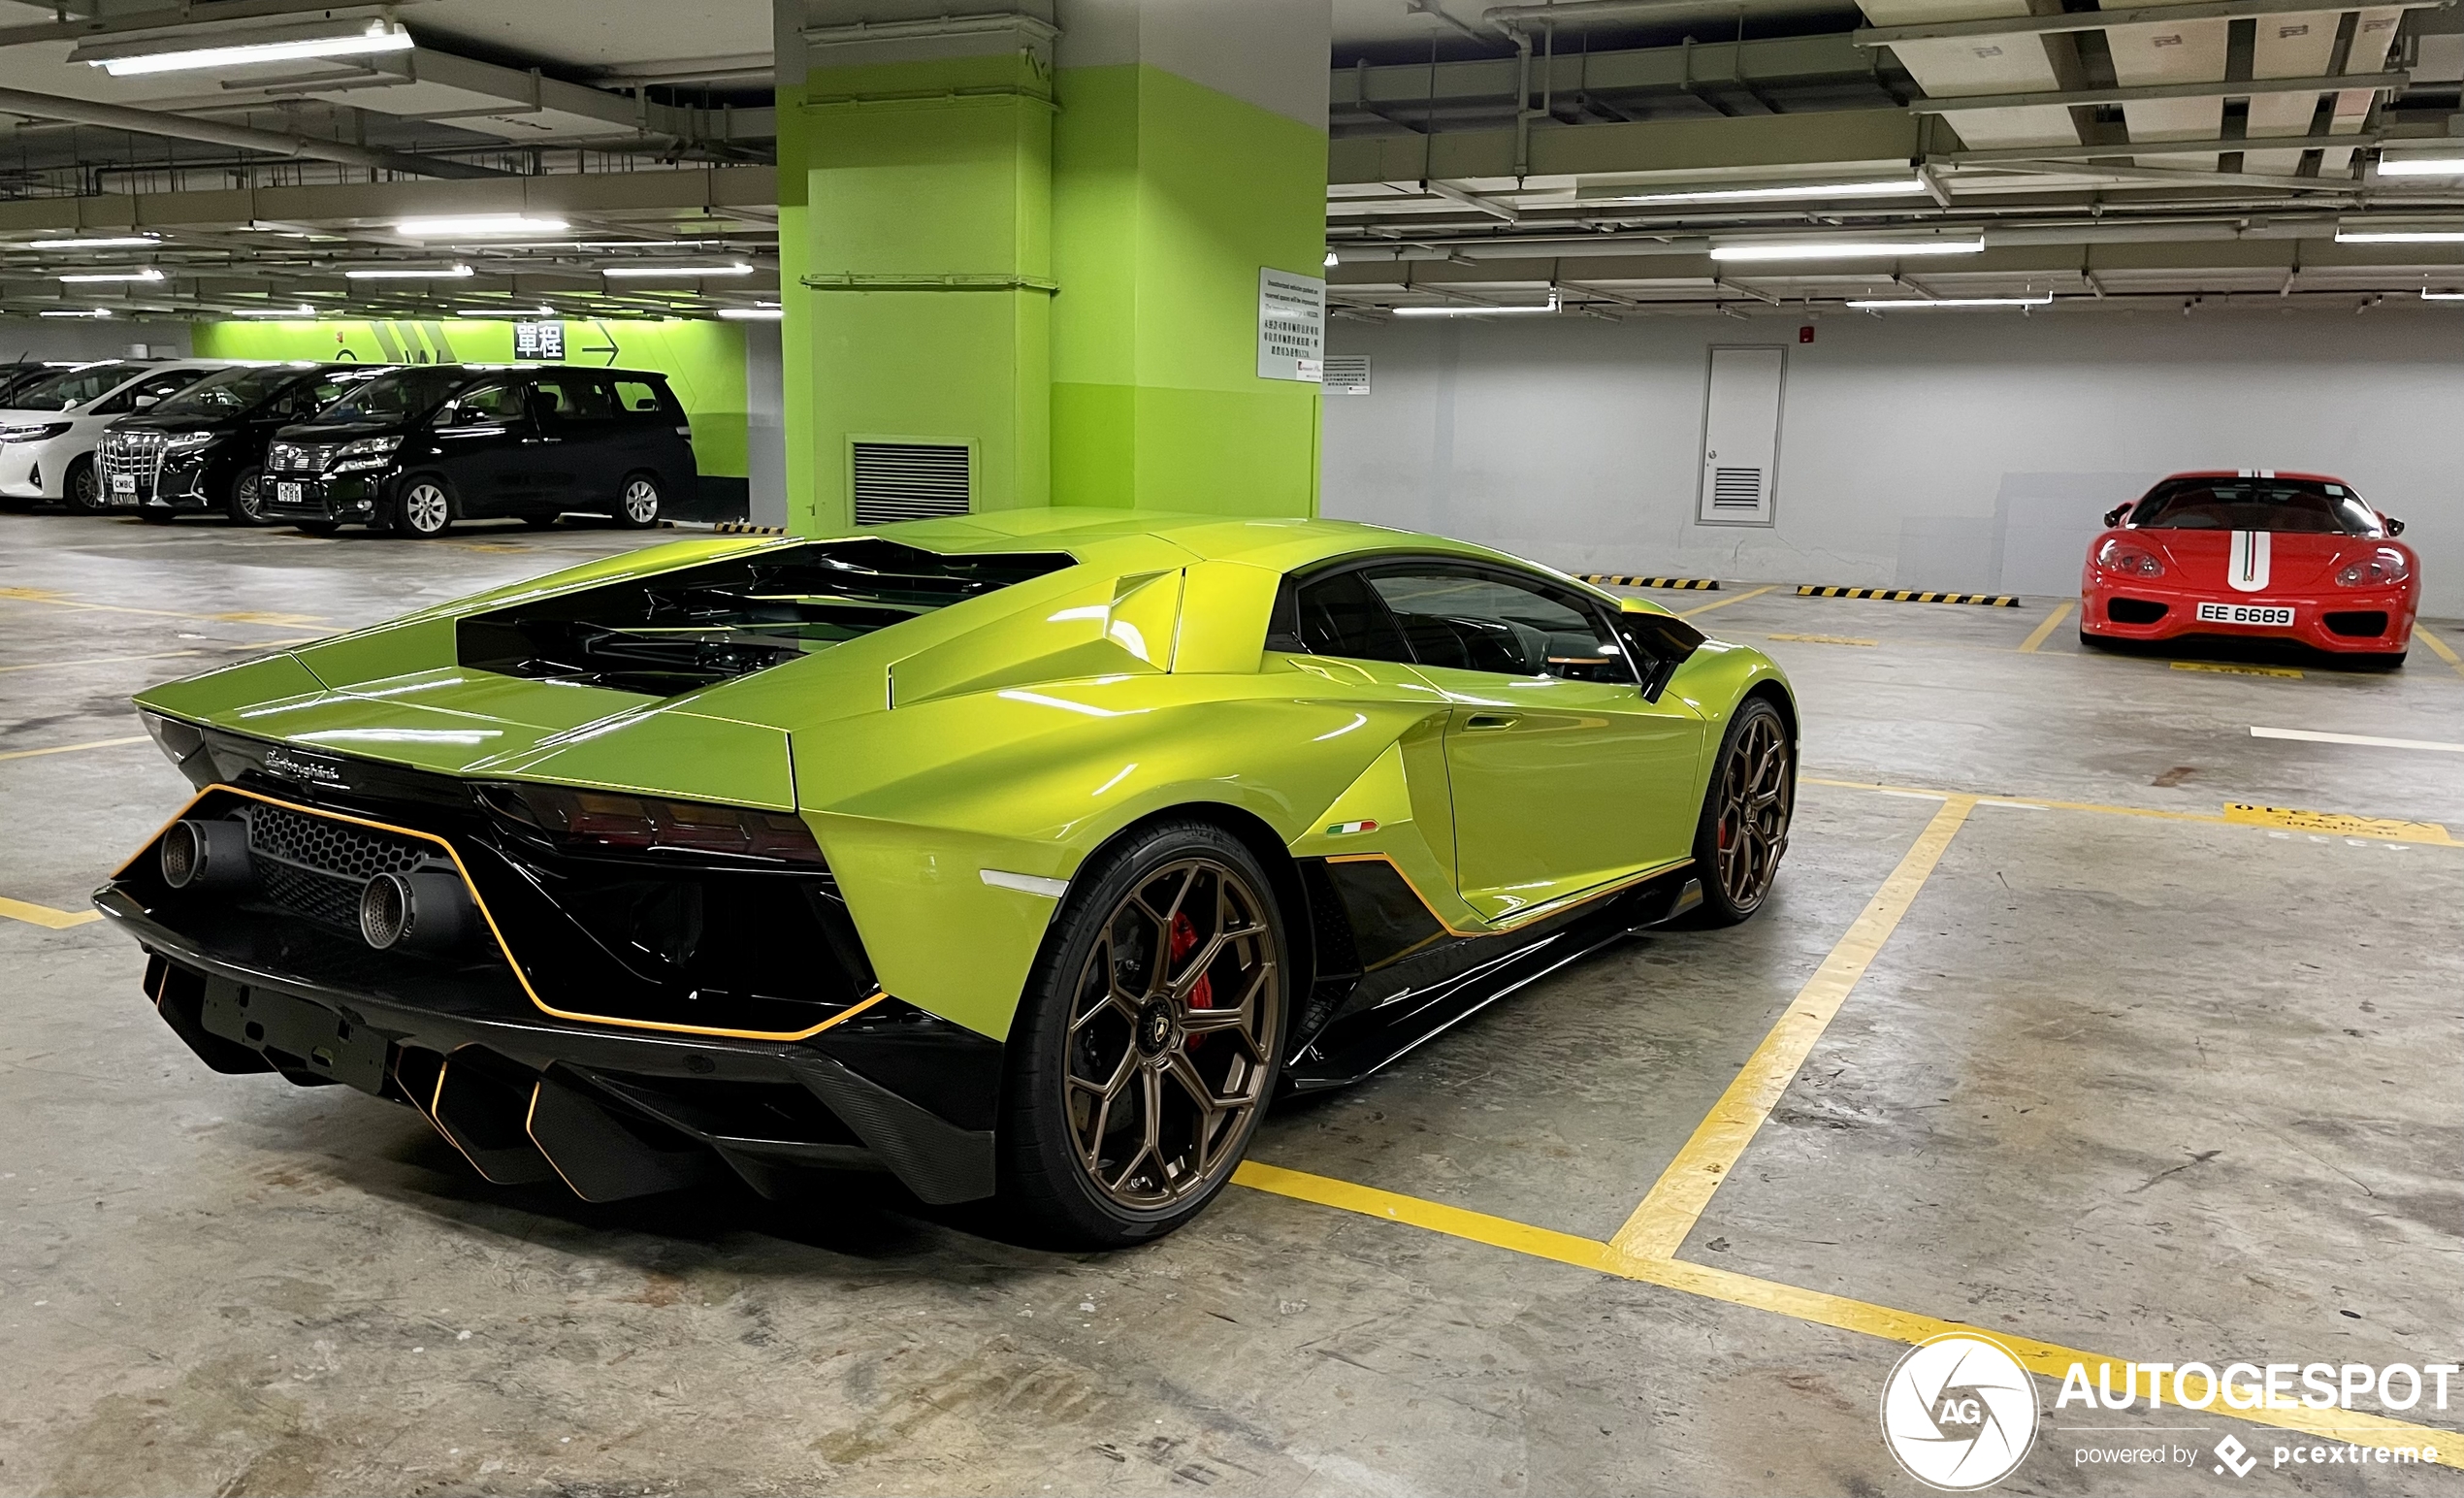 Beautiful Aventador in the underground of Hong Kong